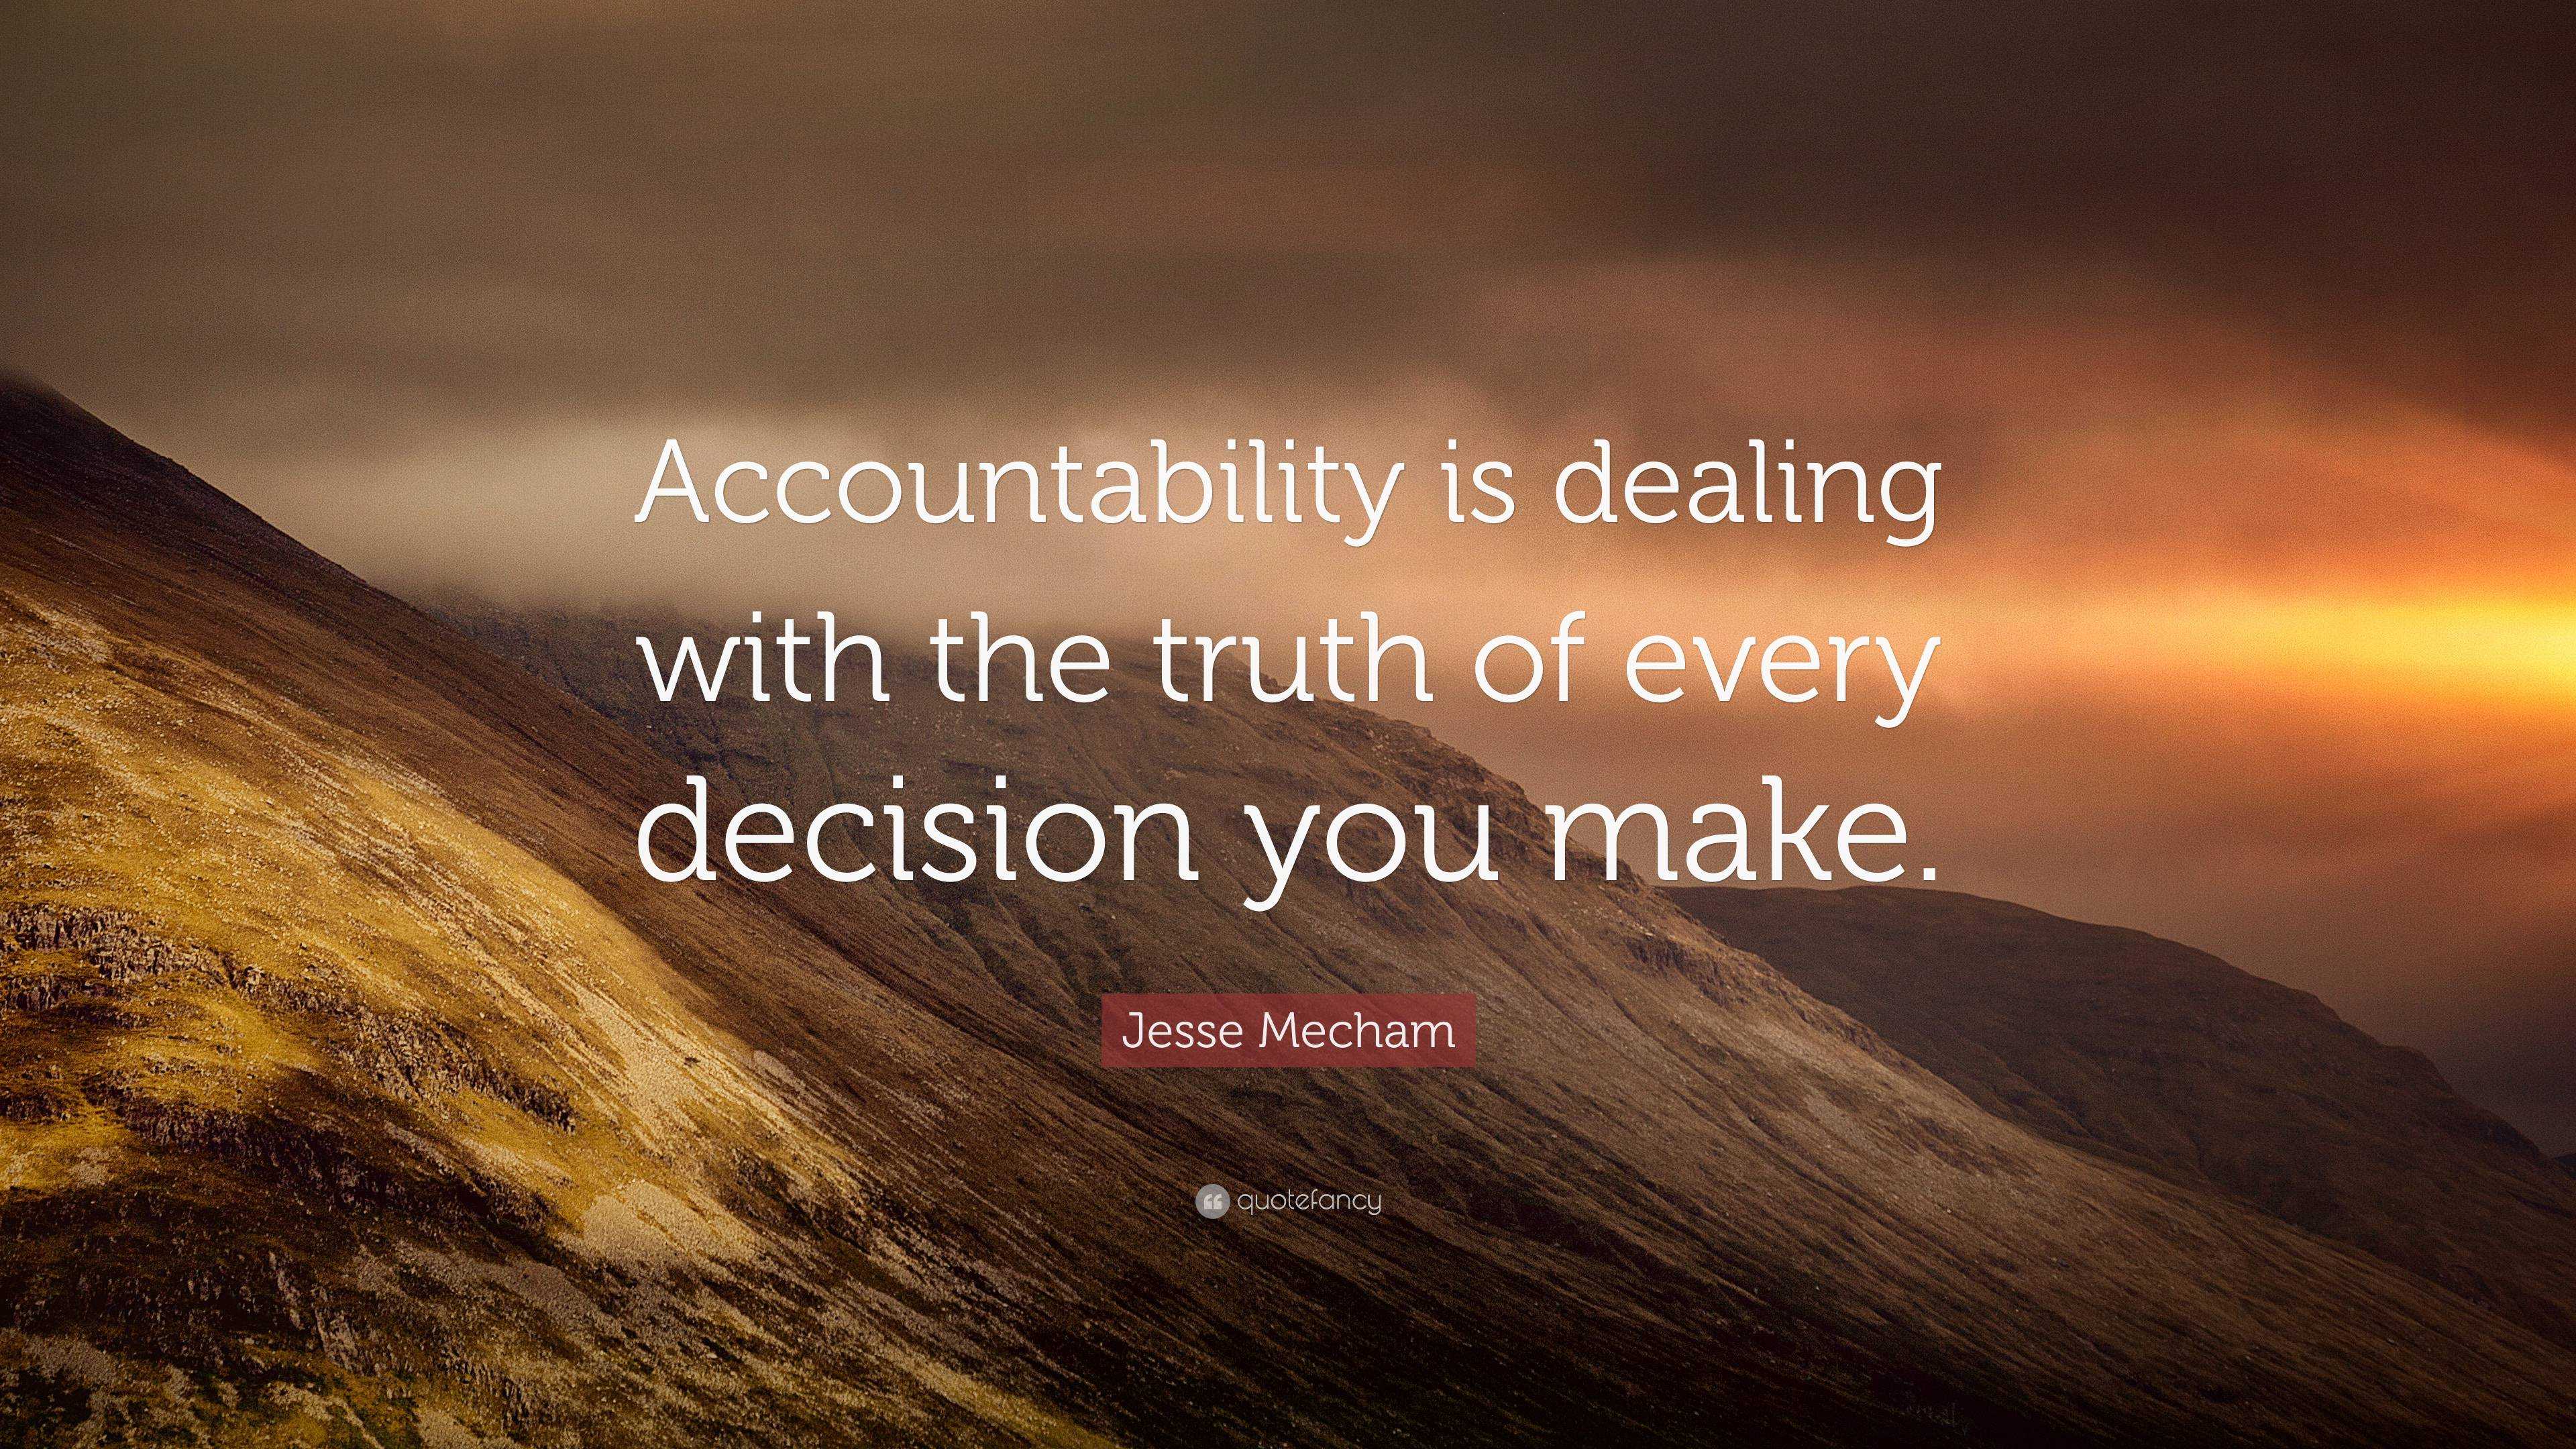 Jesse Mecham Quote: “Accountability is dealing with the truth of every ...